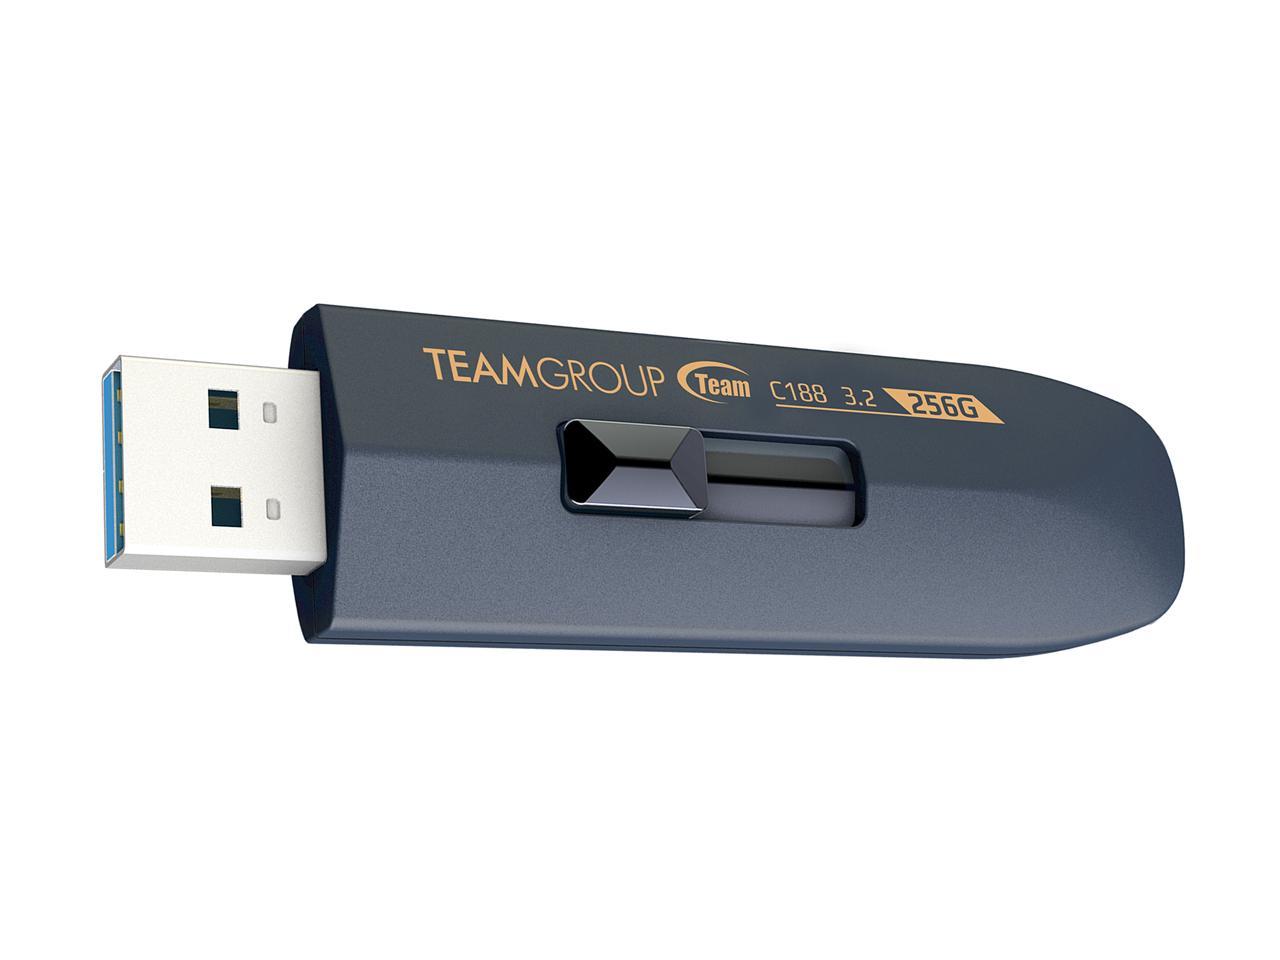 TEAM C188 256GB USB 3.2 Gen 1 Type-A Retractable Flash Drive, up to 130MB/S @ $21.99 + F/S